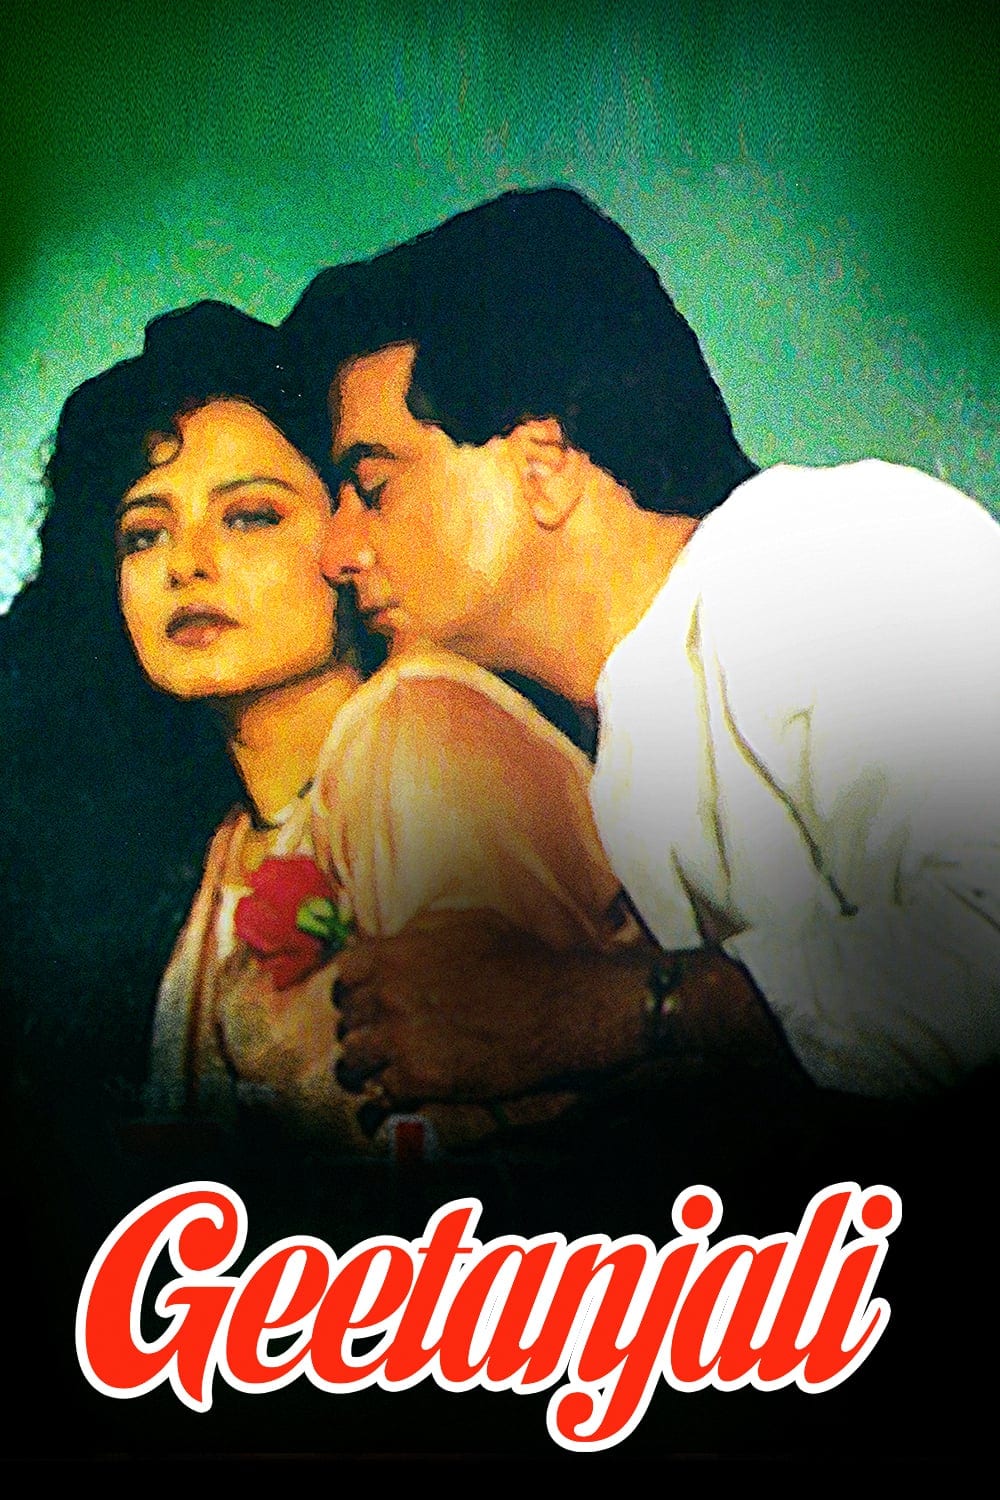 Poster for the movie "Geetanjali"